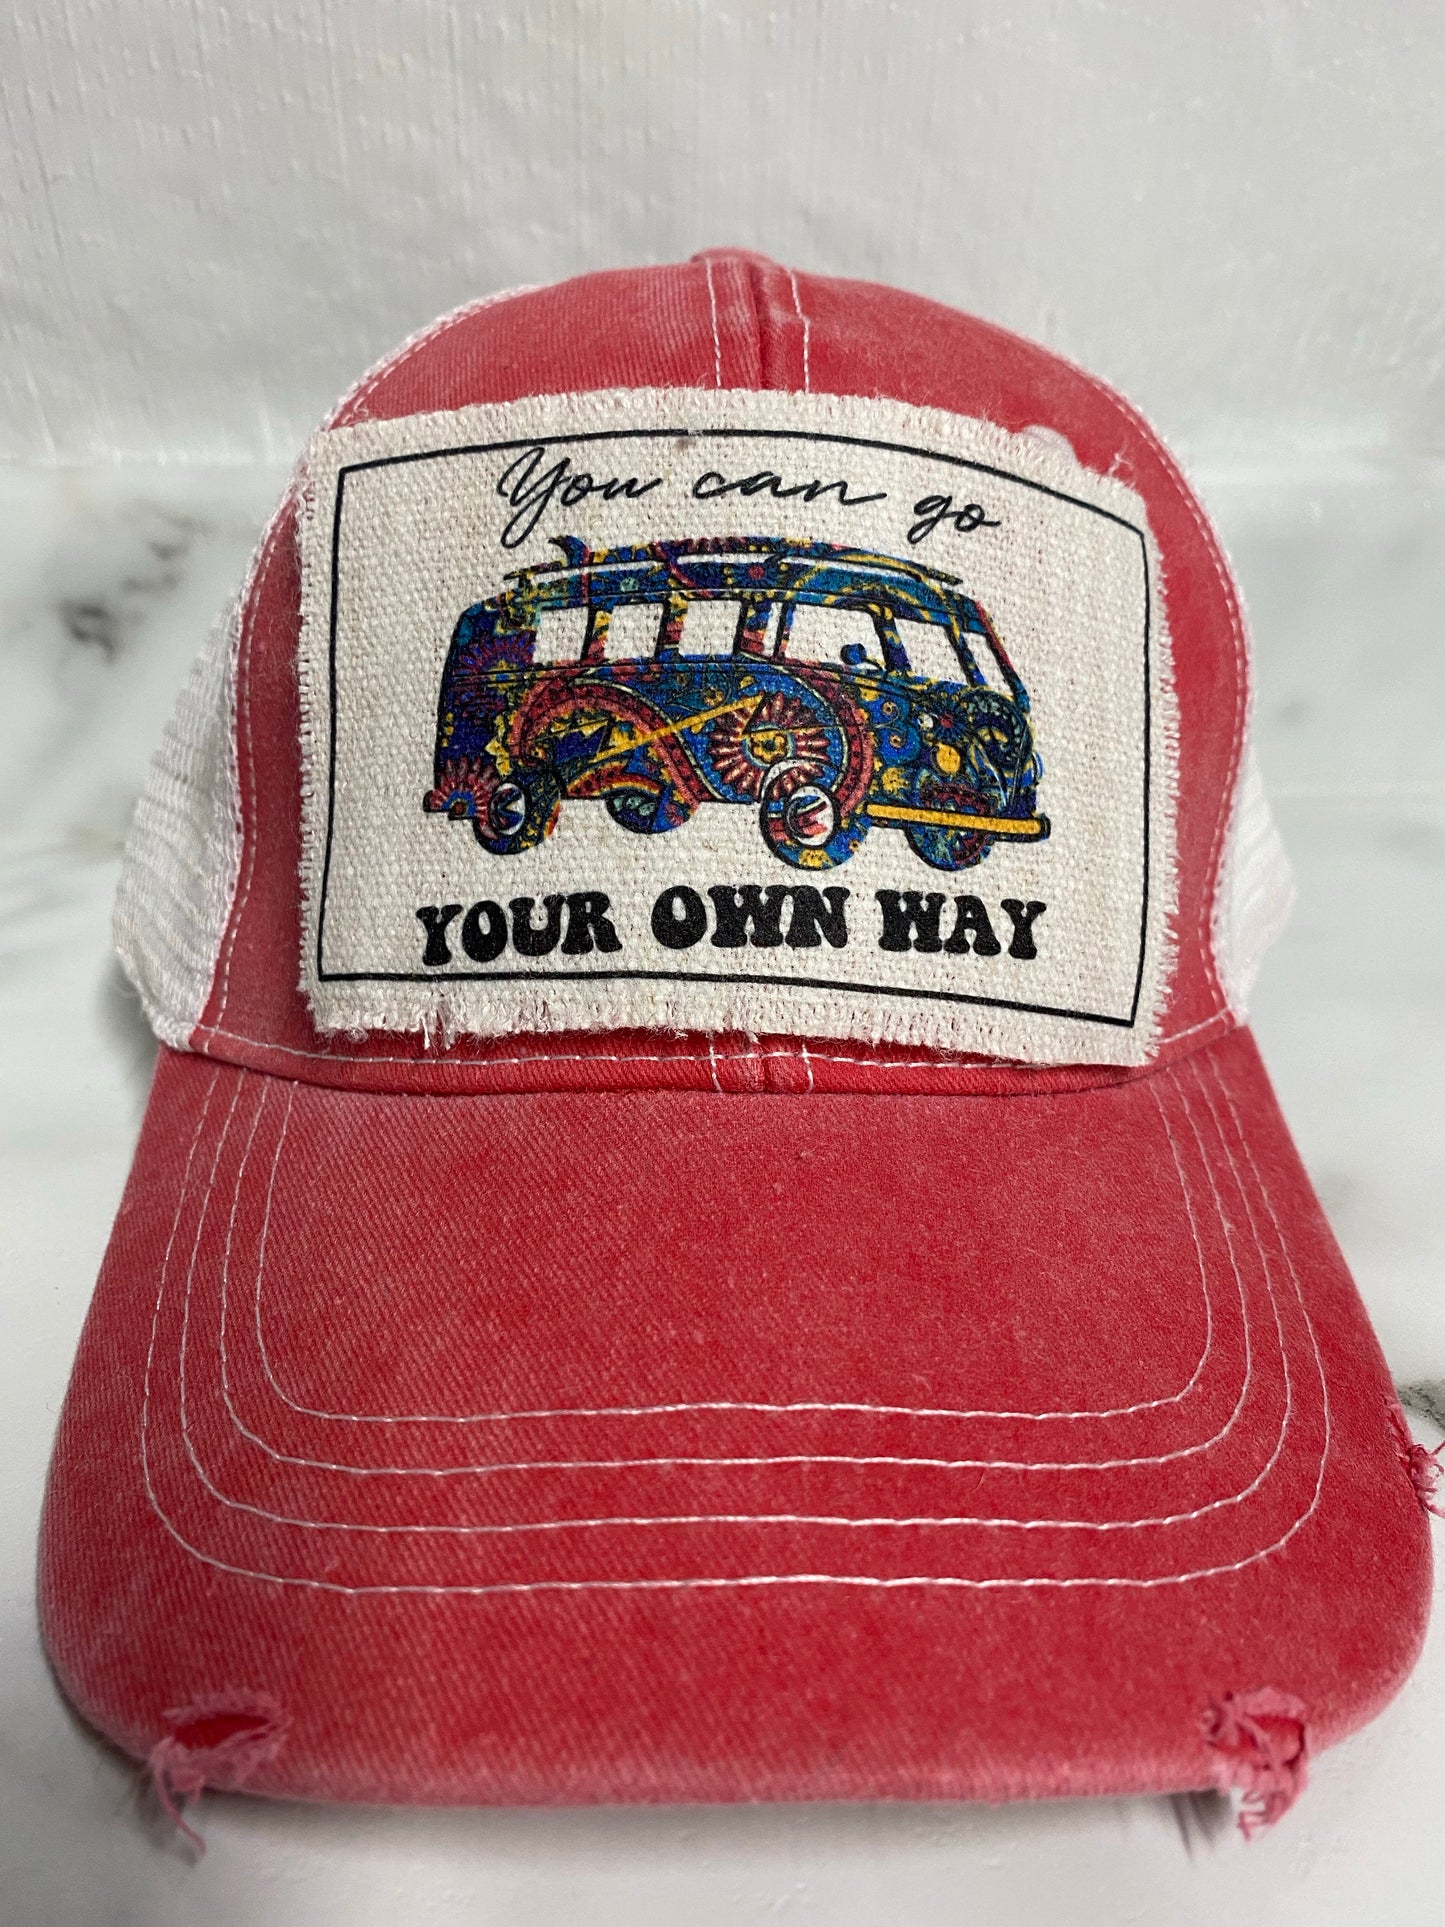 You Can Go Your Own Way Hat Patch